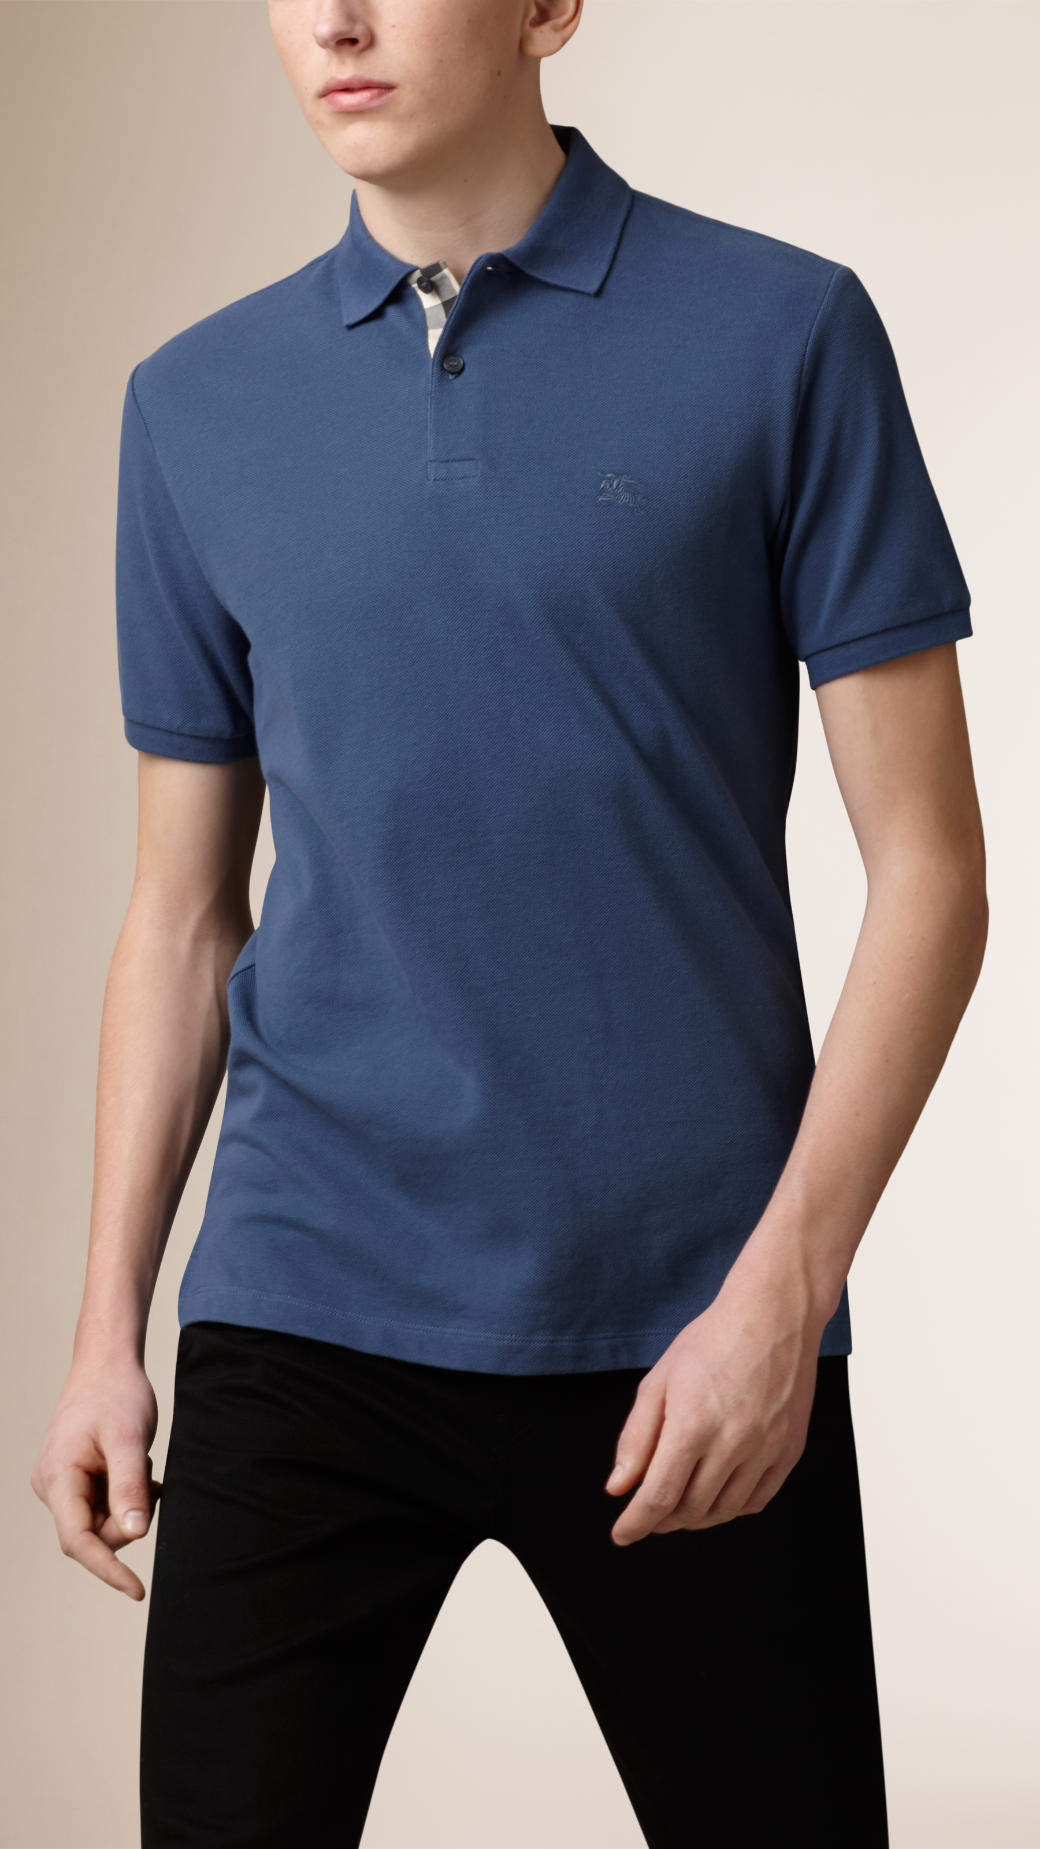 Lyst - Burberry Check Placket Polo Shirt in Blue for Men